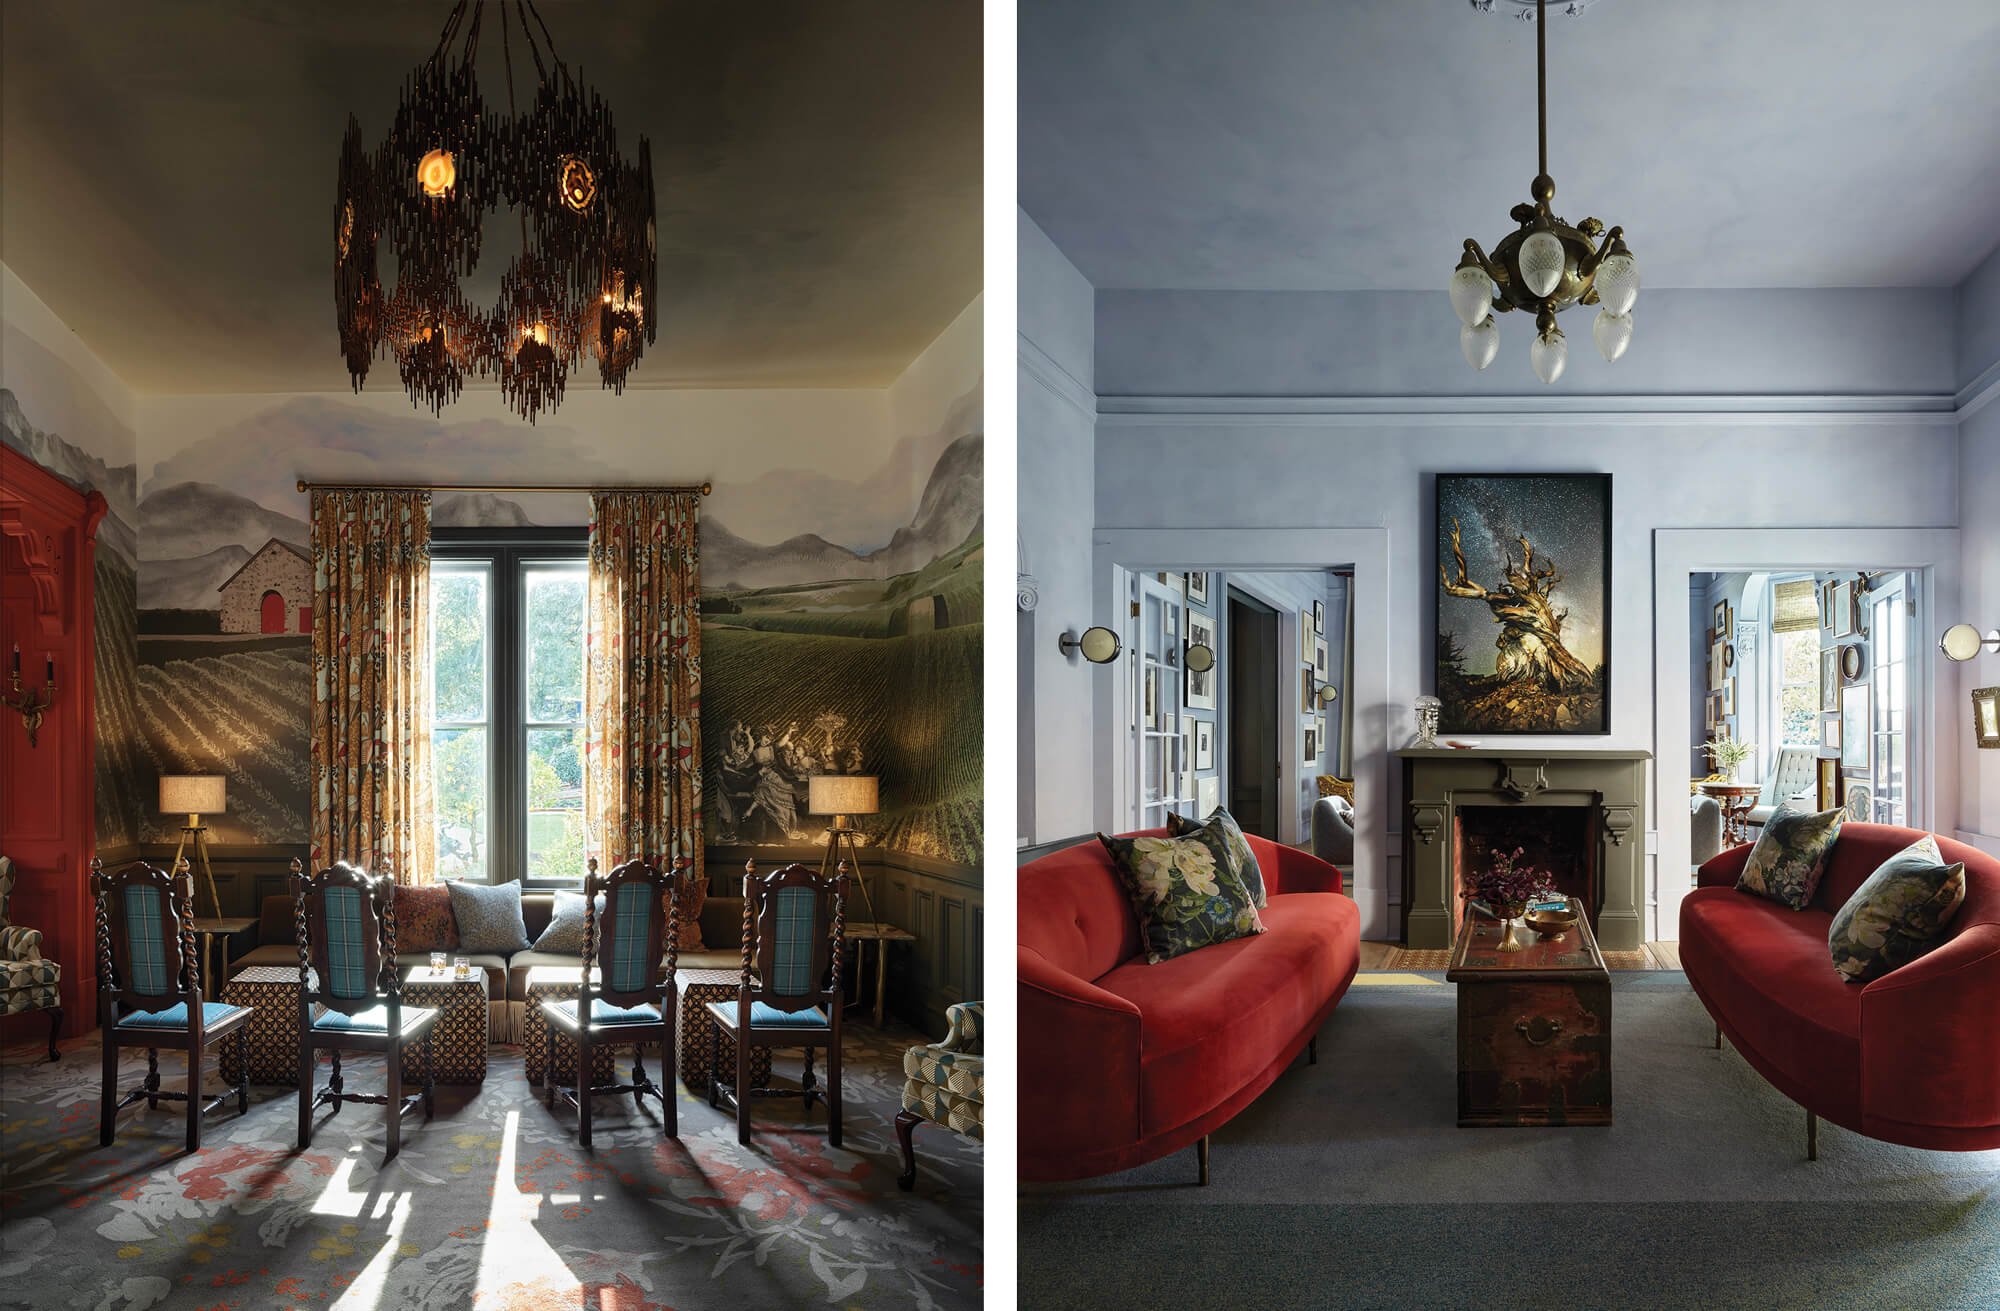 On left is an image of the formal dining room. On right is the living room.